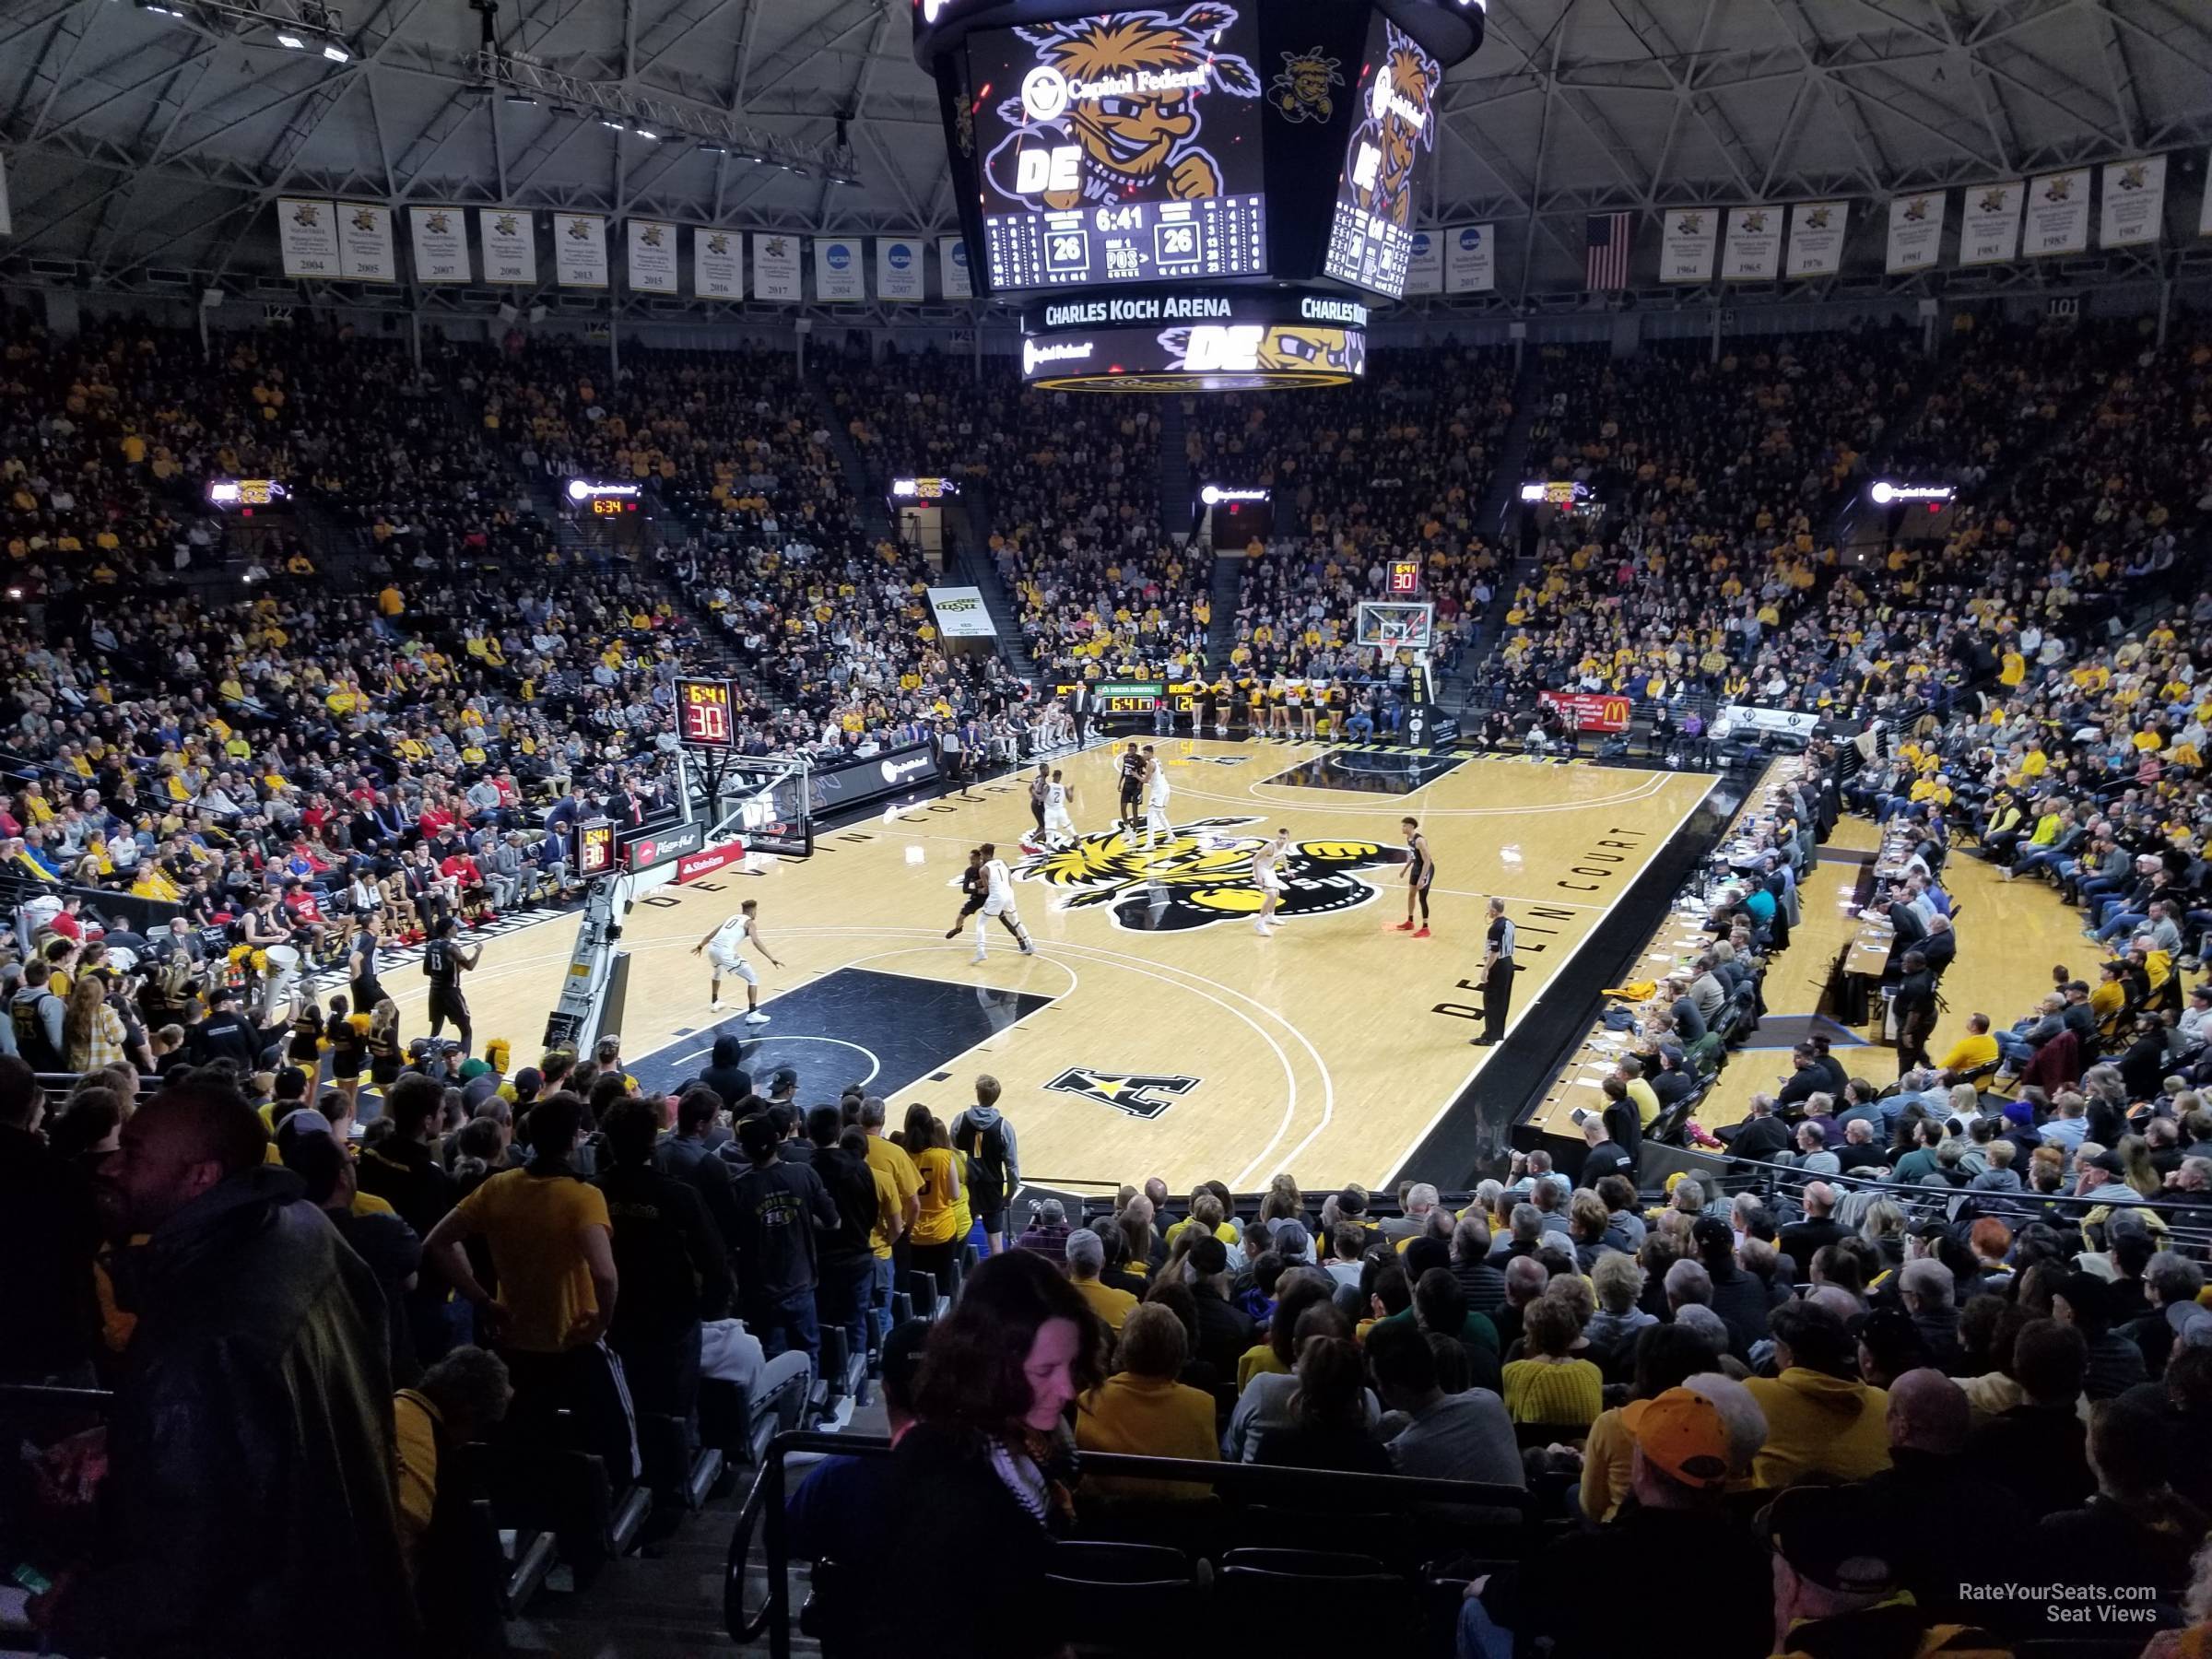 section 115, row 21 seat view  - charles koch arena